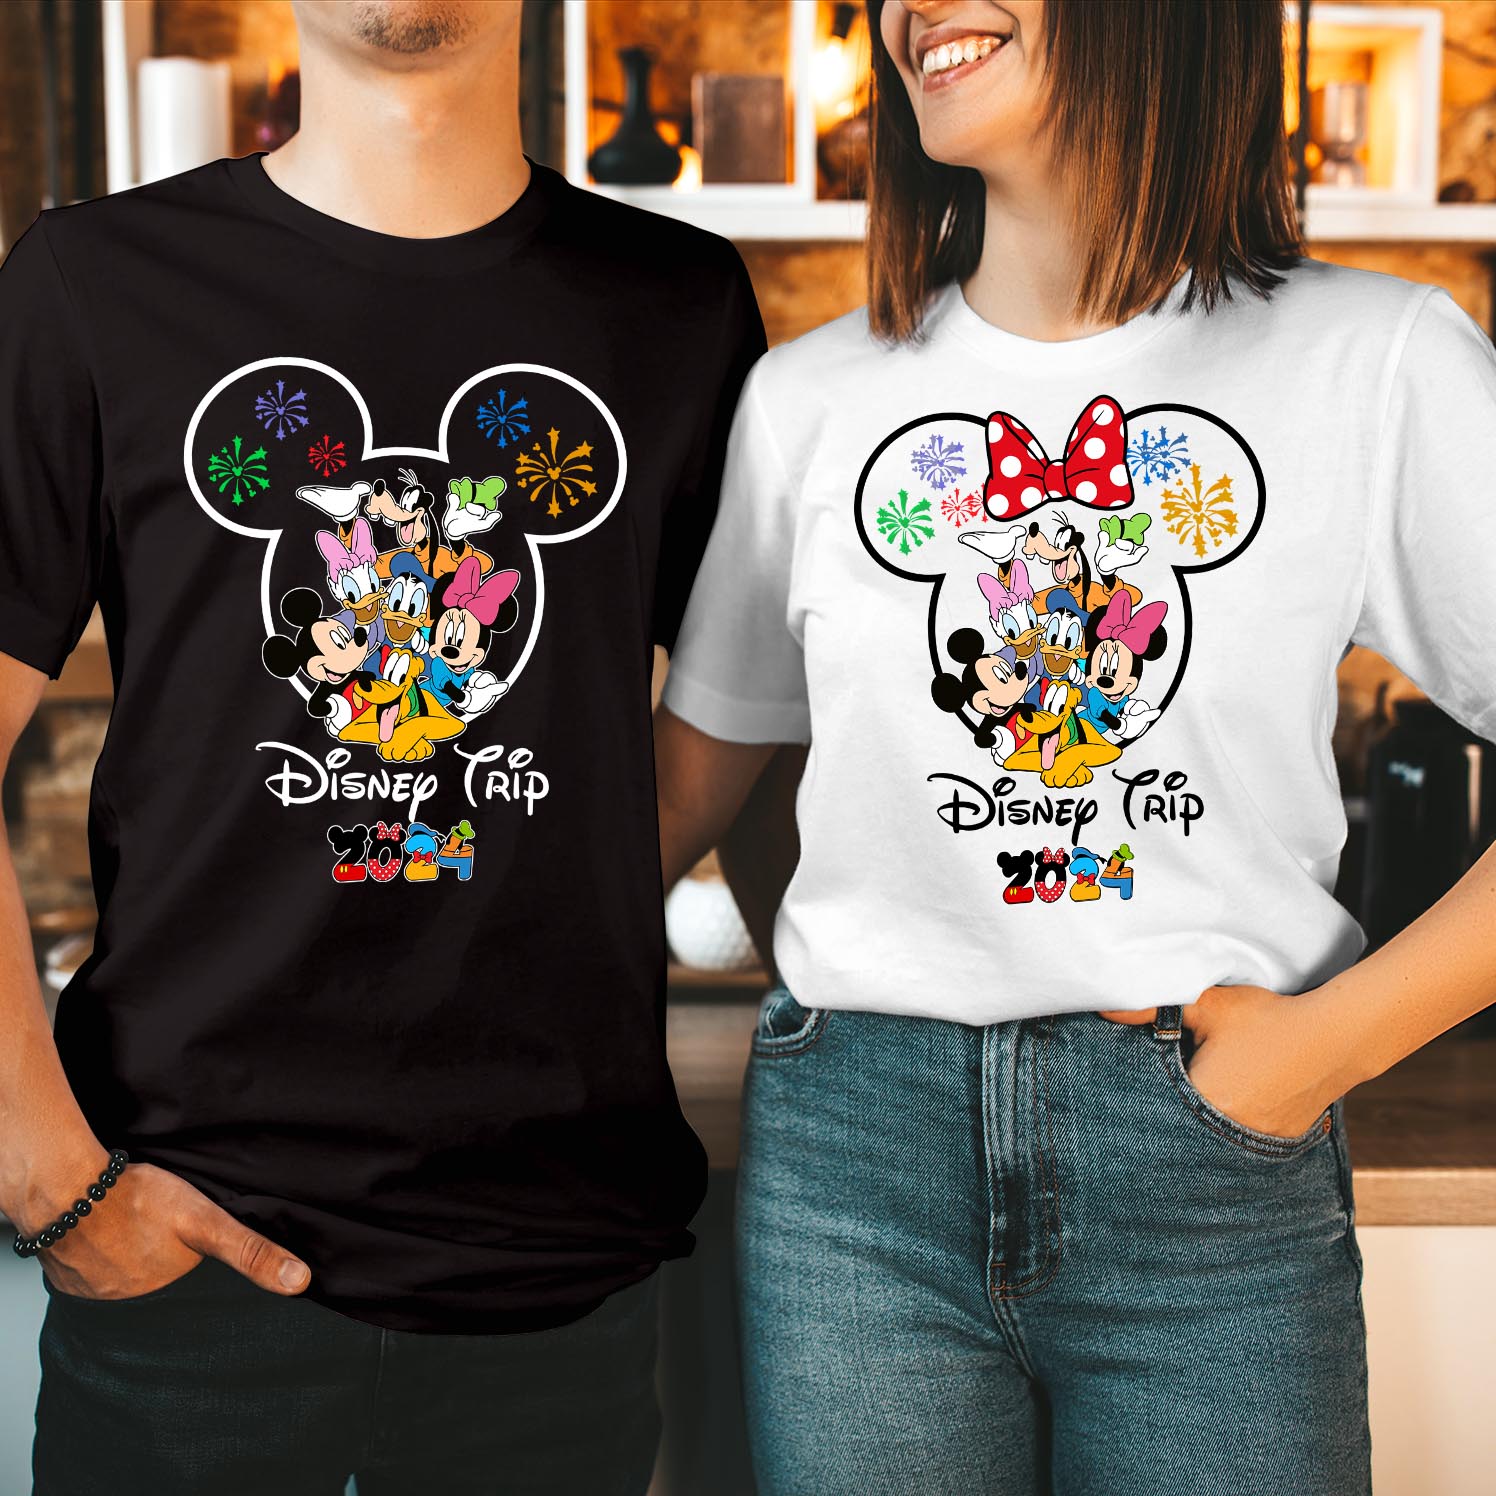 Disney Mickey Minnie Mouse Trip 2024 Family Holiday T-Shirt Summer Vacation Tops Minnie Mickey Friends Disneyland Tour Mom Dad Kids Matching T Shirt